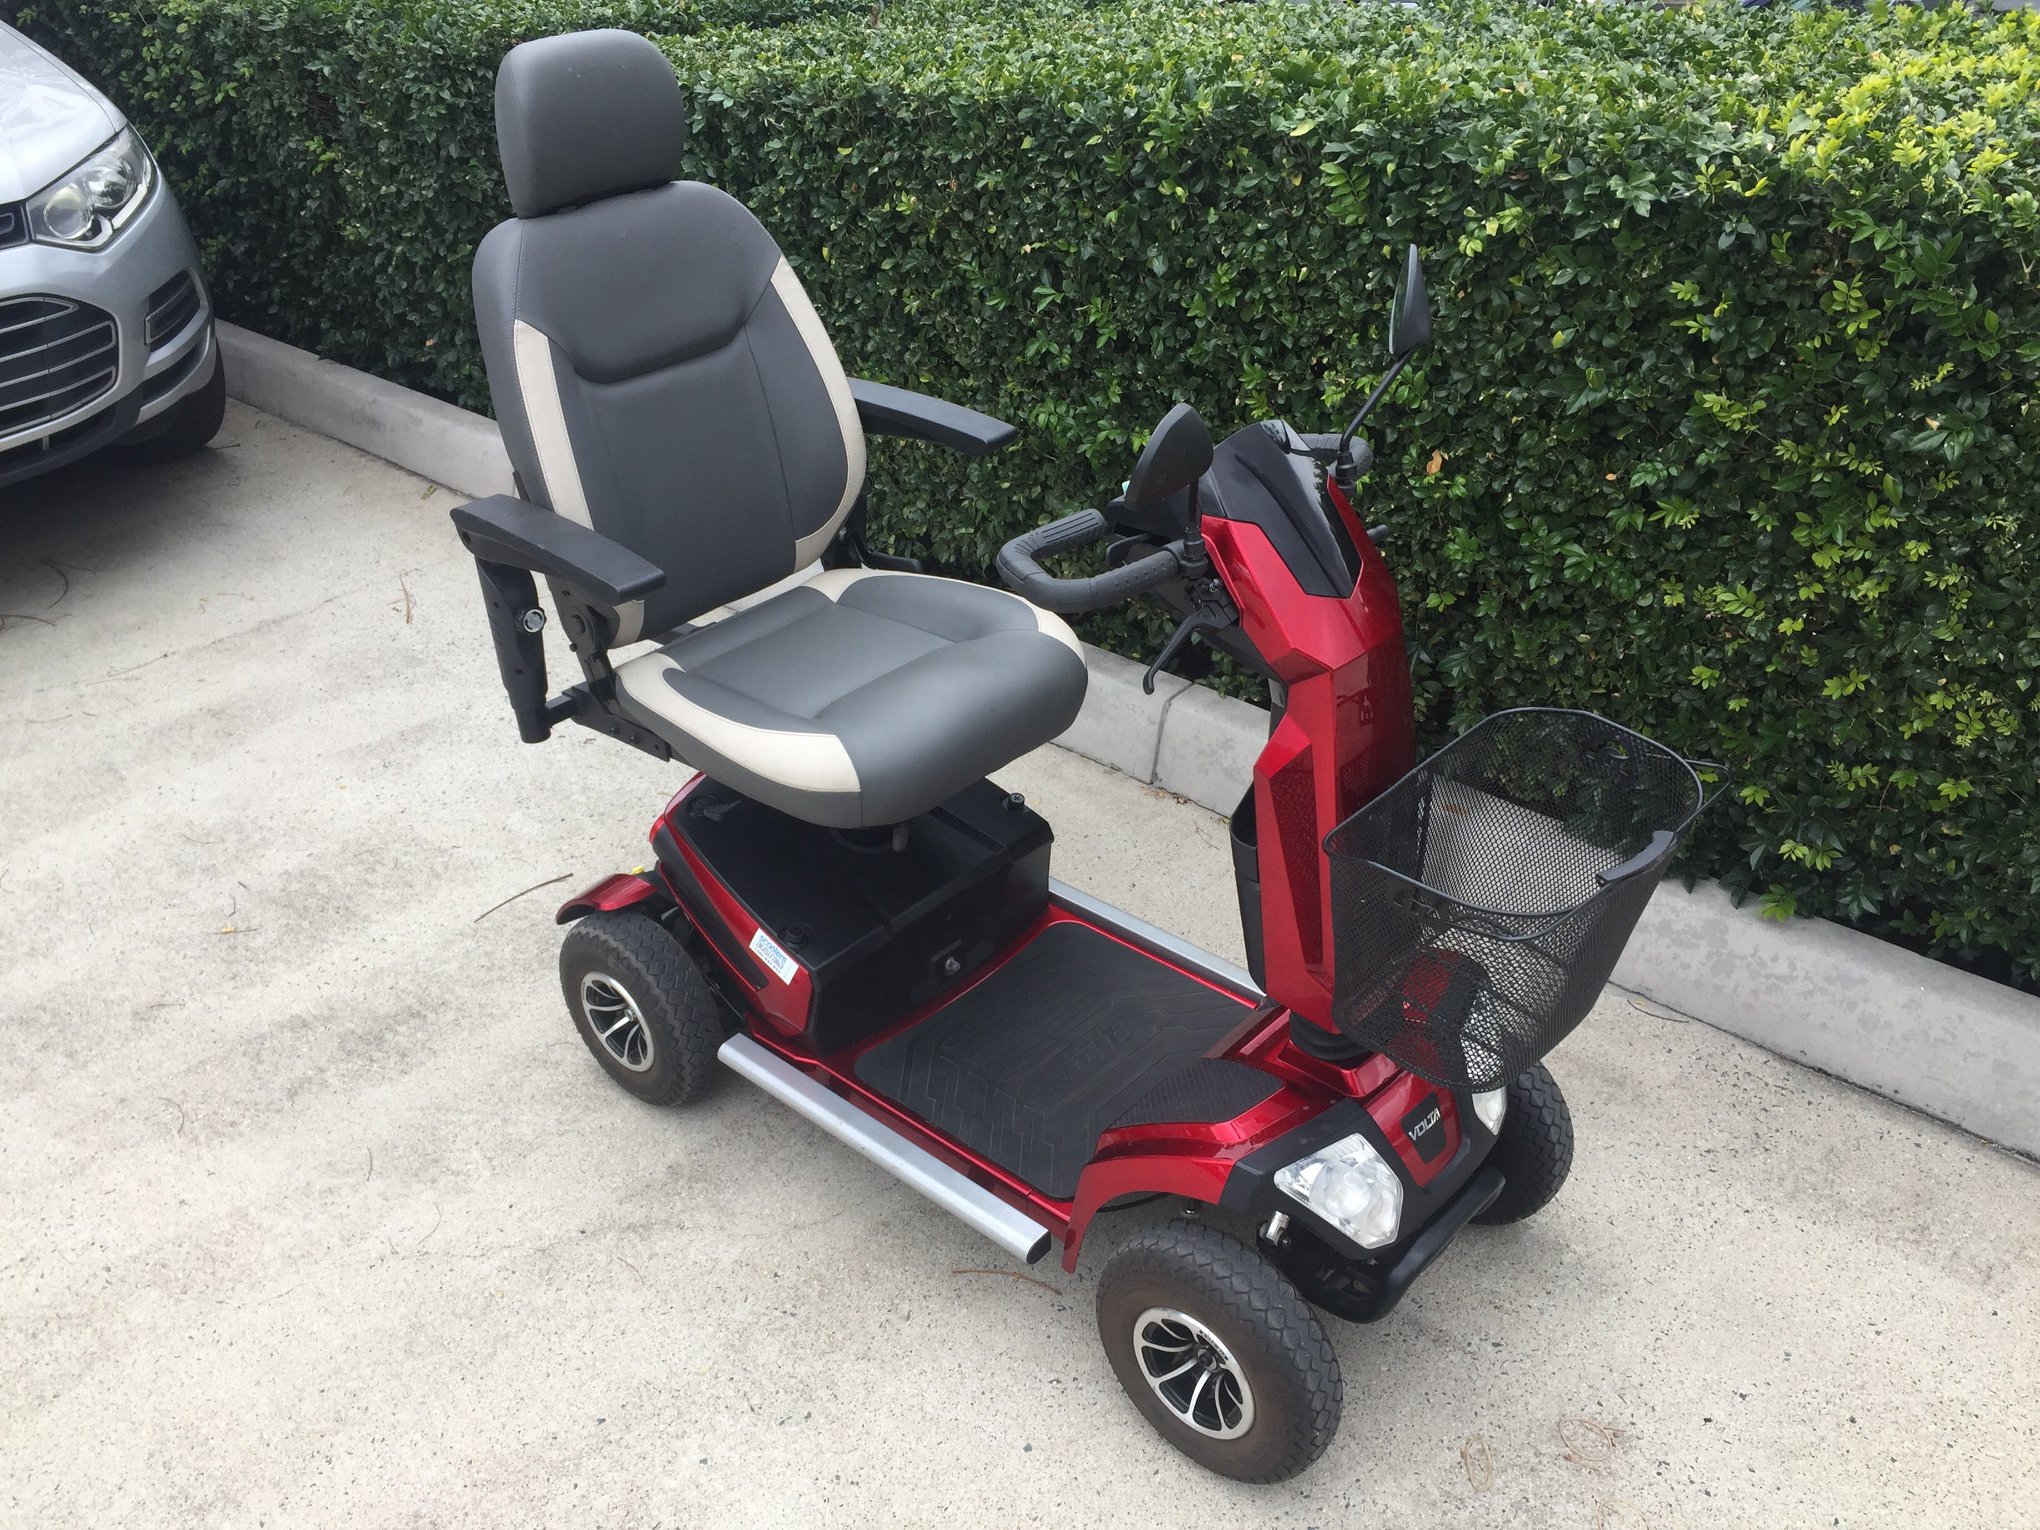 used mobility scooters for sale by owner